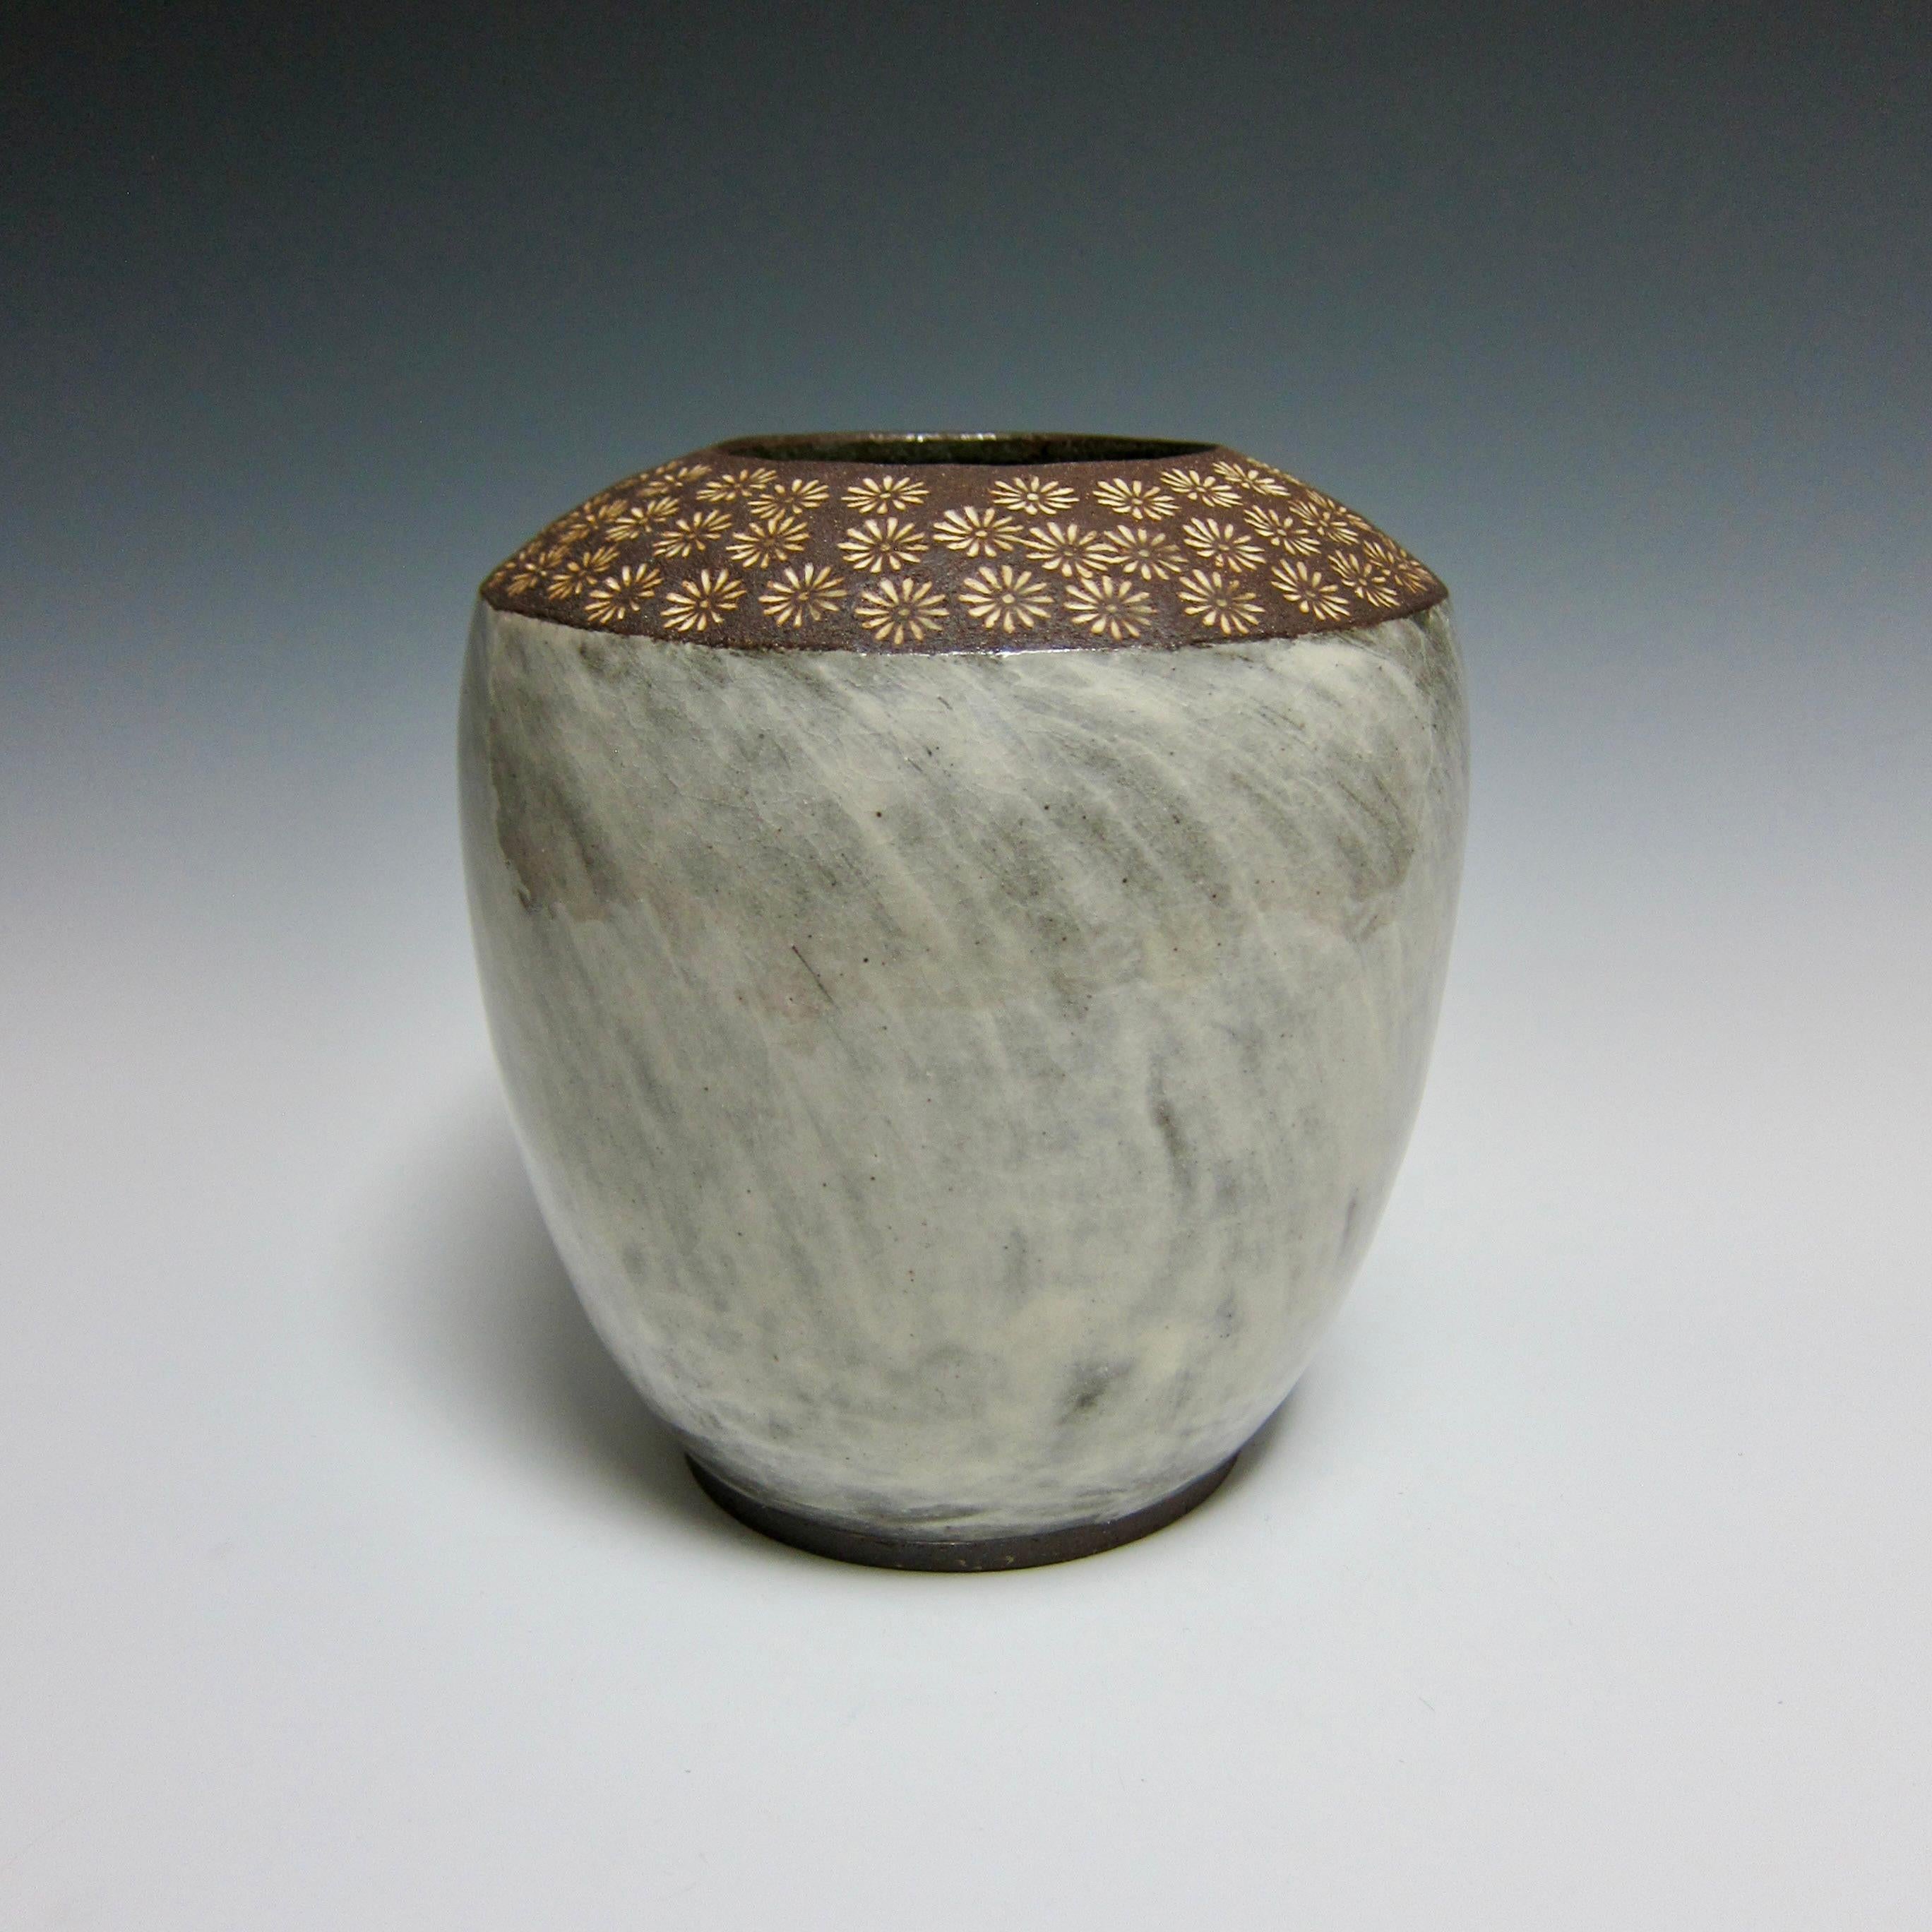 Flower Stamp Buncheong Vase by Jason Fox.

A Southern Californian for over half his life, Contemporary Ceramic Artist Jason Fox draws upon his classical education in Architecture and Art History as well as his love of surfing and the ocean. He works